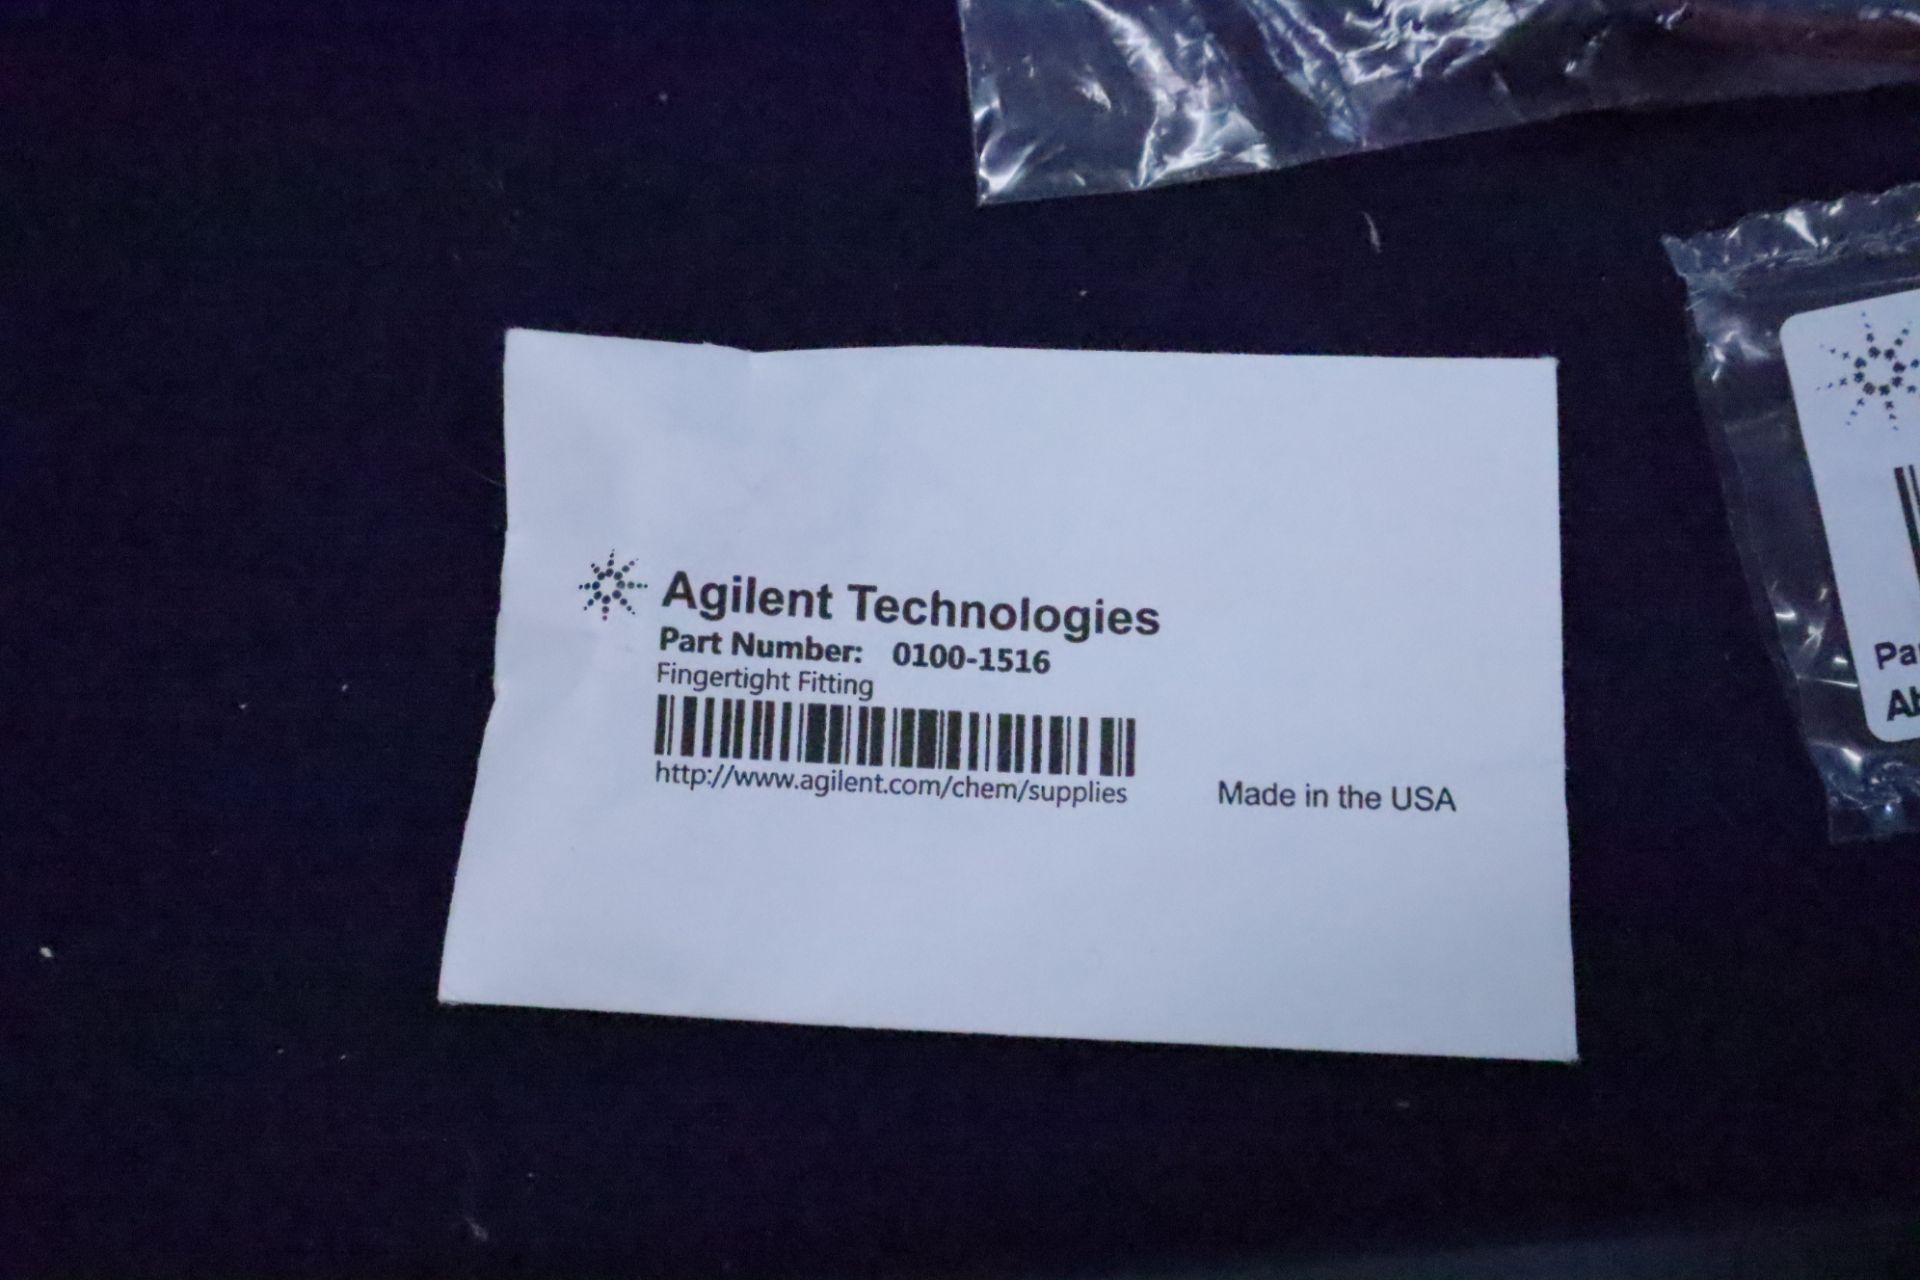 (NIB) Agilent Technologies OEM Replacement Parts for LC/MS Machines - Image 28 of 28